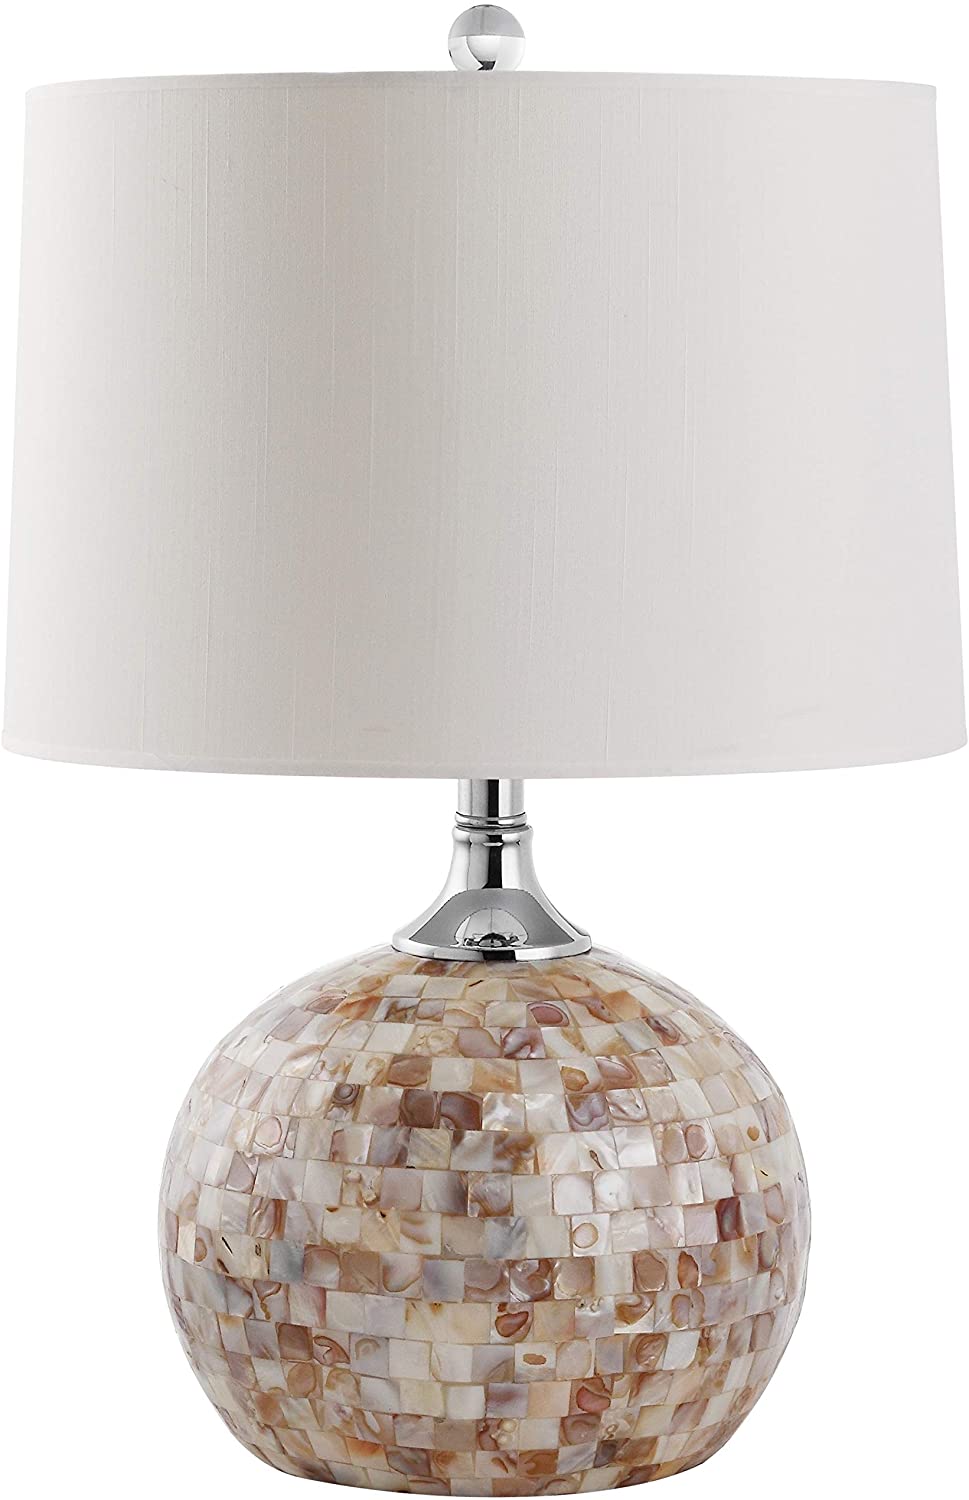 Unknown1 Lighting 22 inch Shell Table Lamp 14